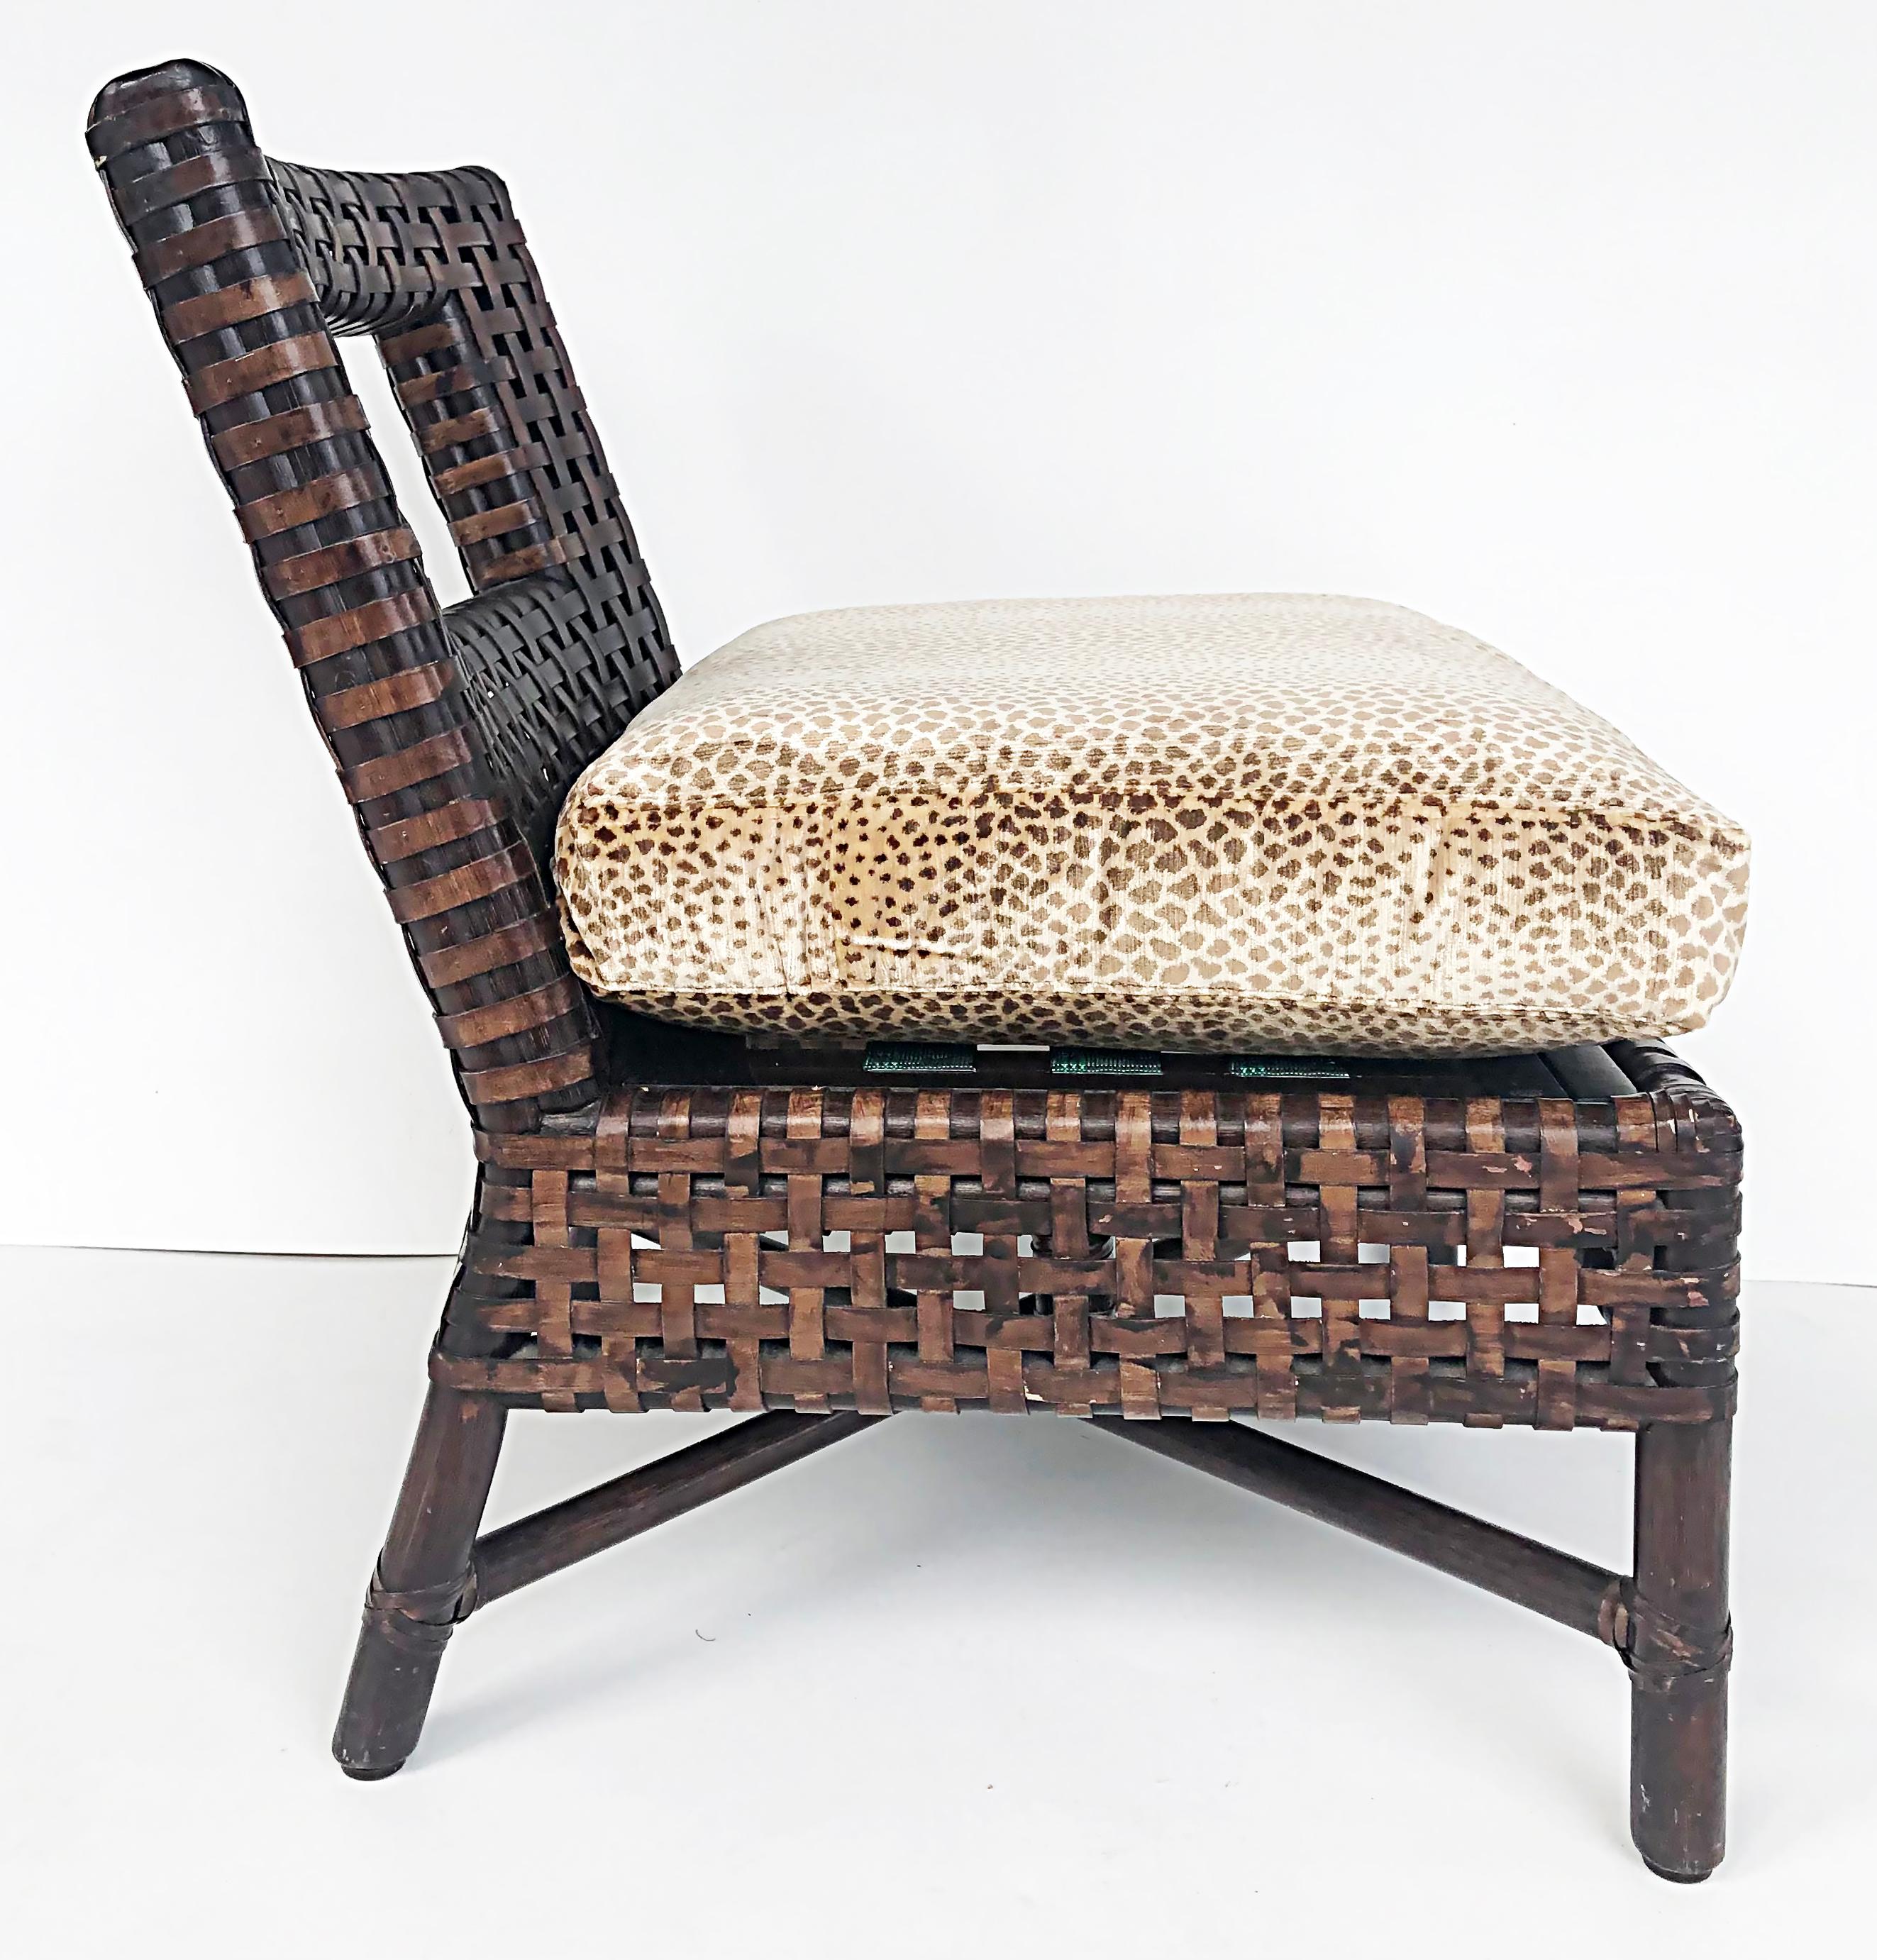 20th Century McGuire San Francisco Woven Leather Slipper Chairs, Upholstered Loose Cushions